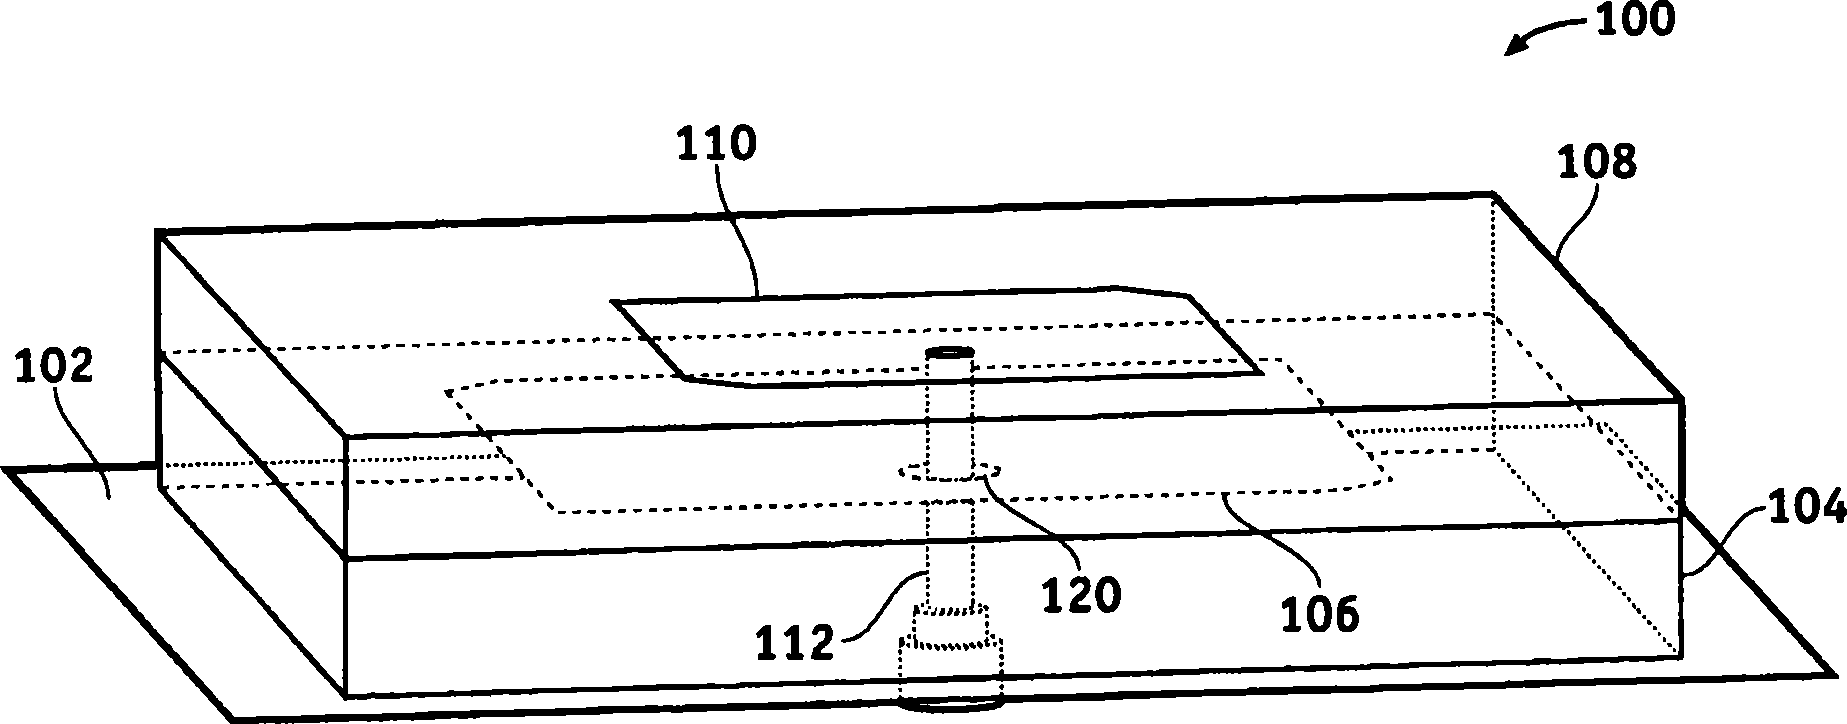 Dual band stacked patch antenna